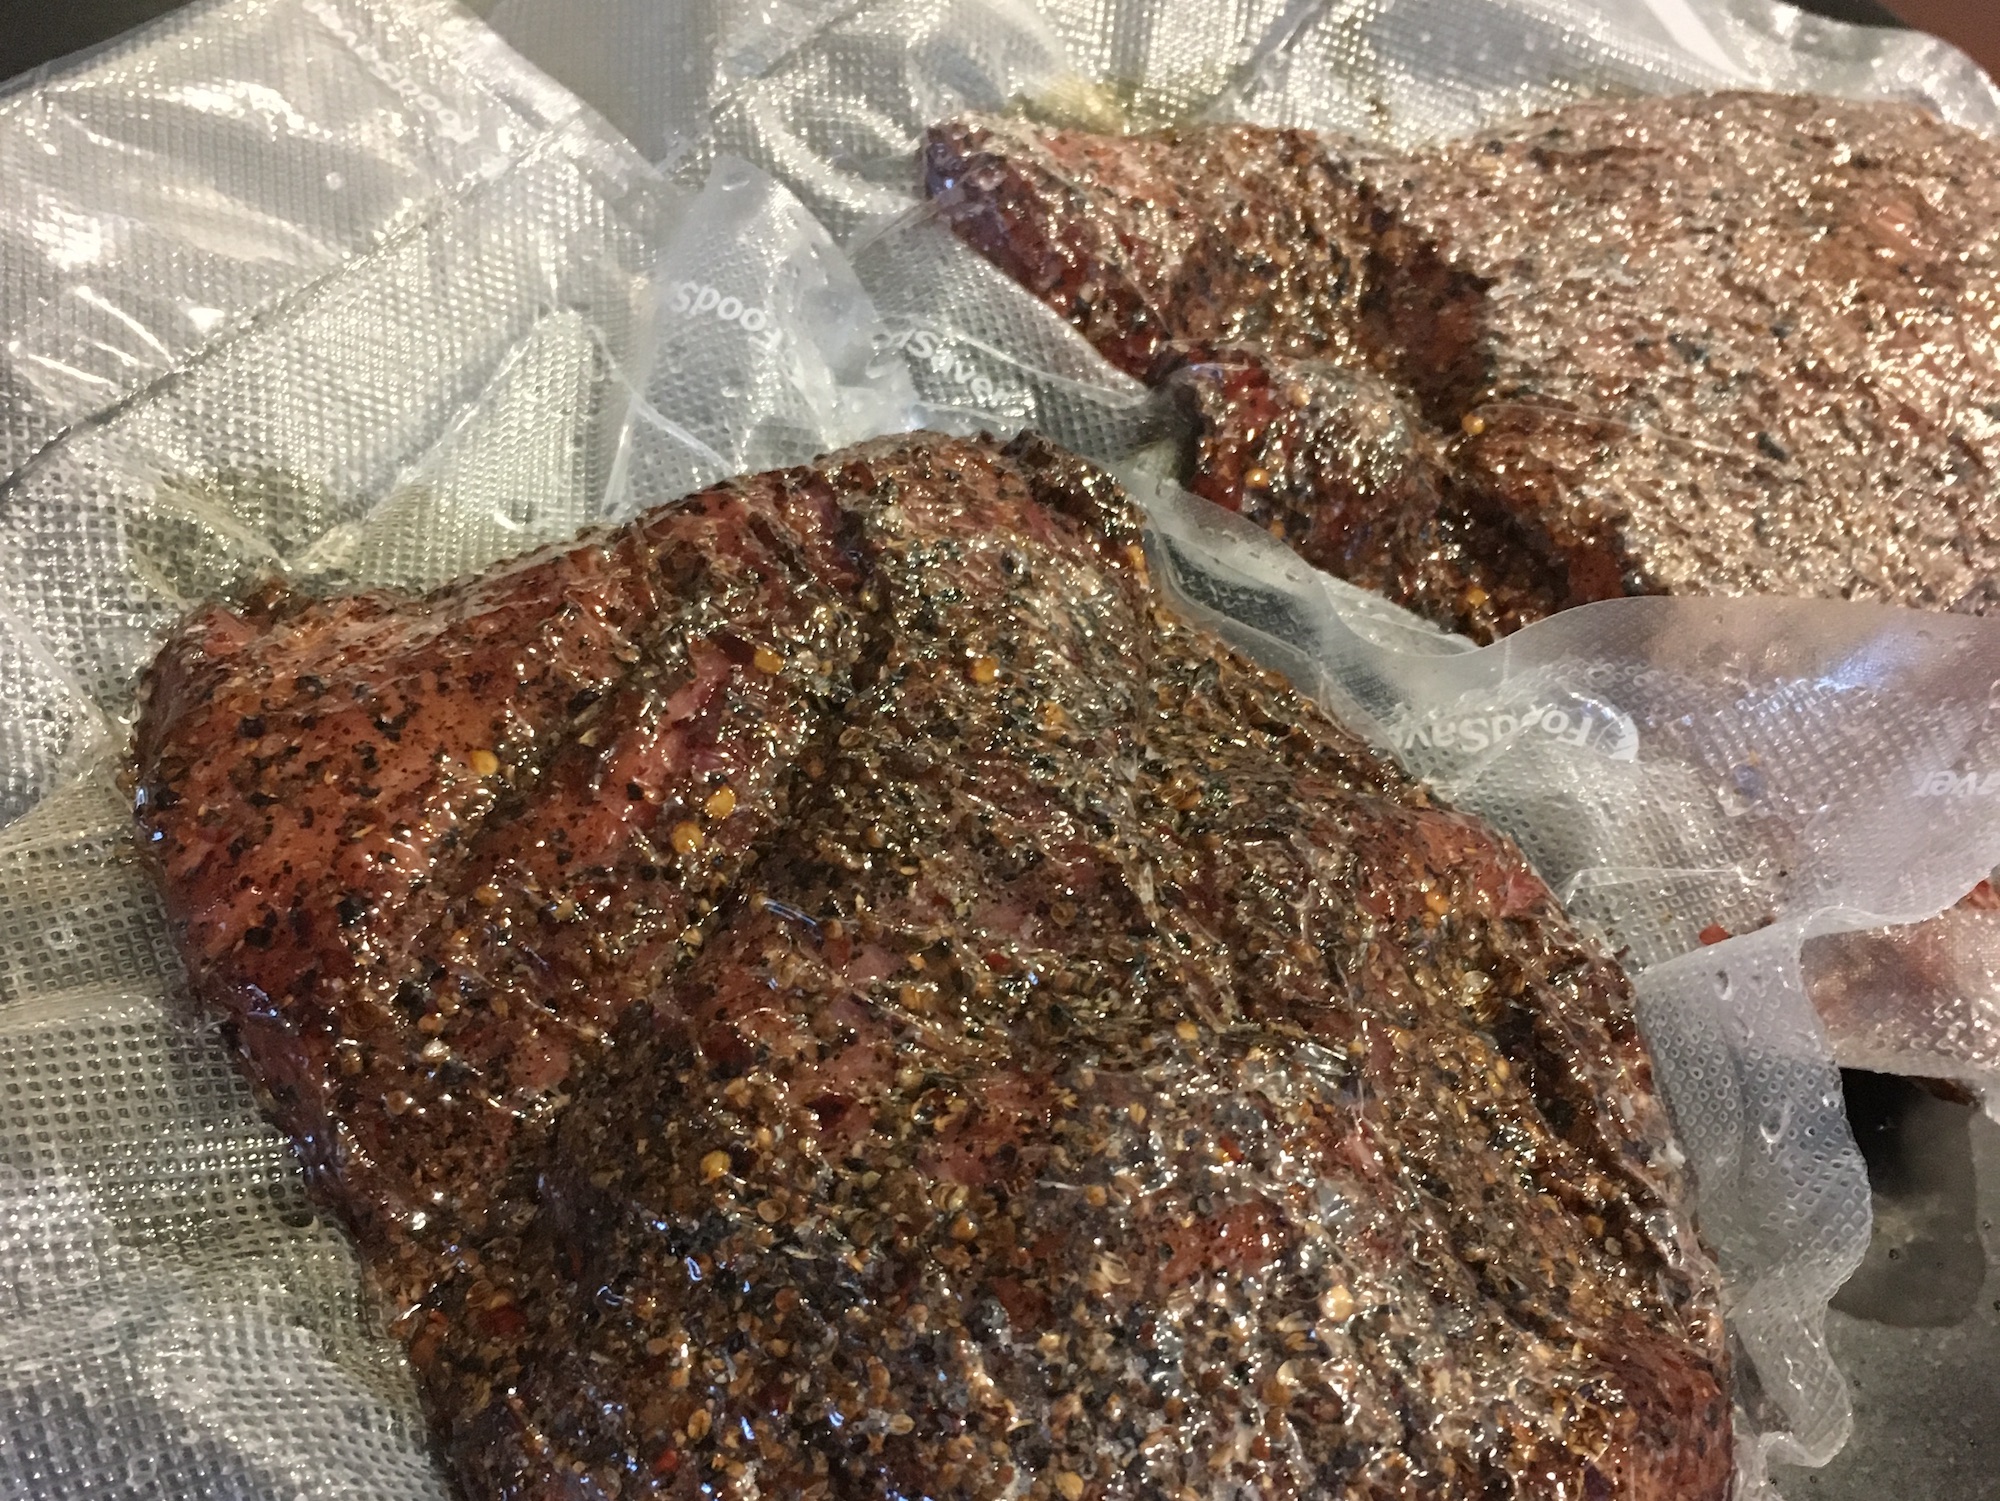 Pastramis smoked and ready to sous vide